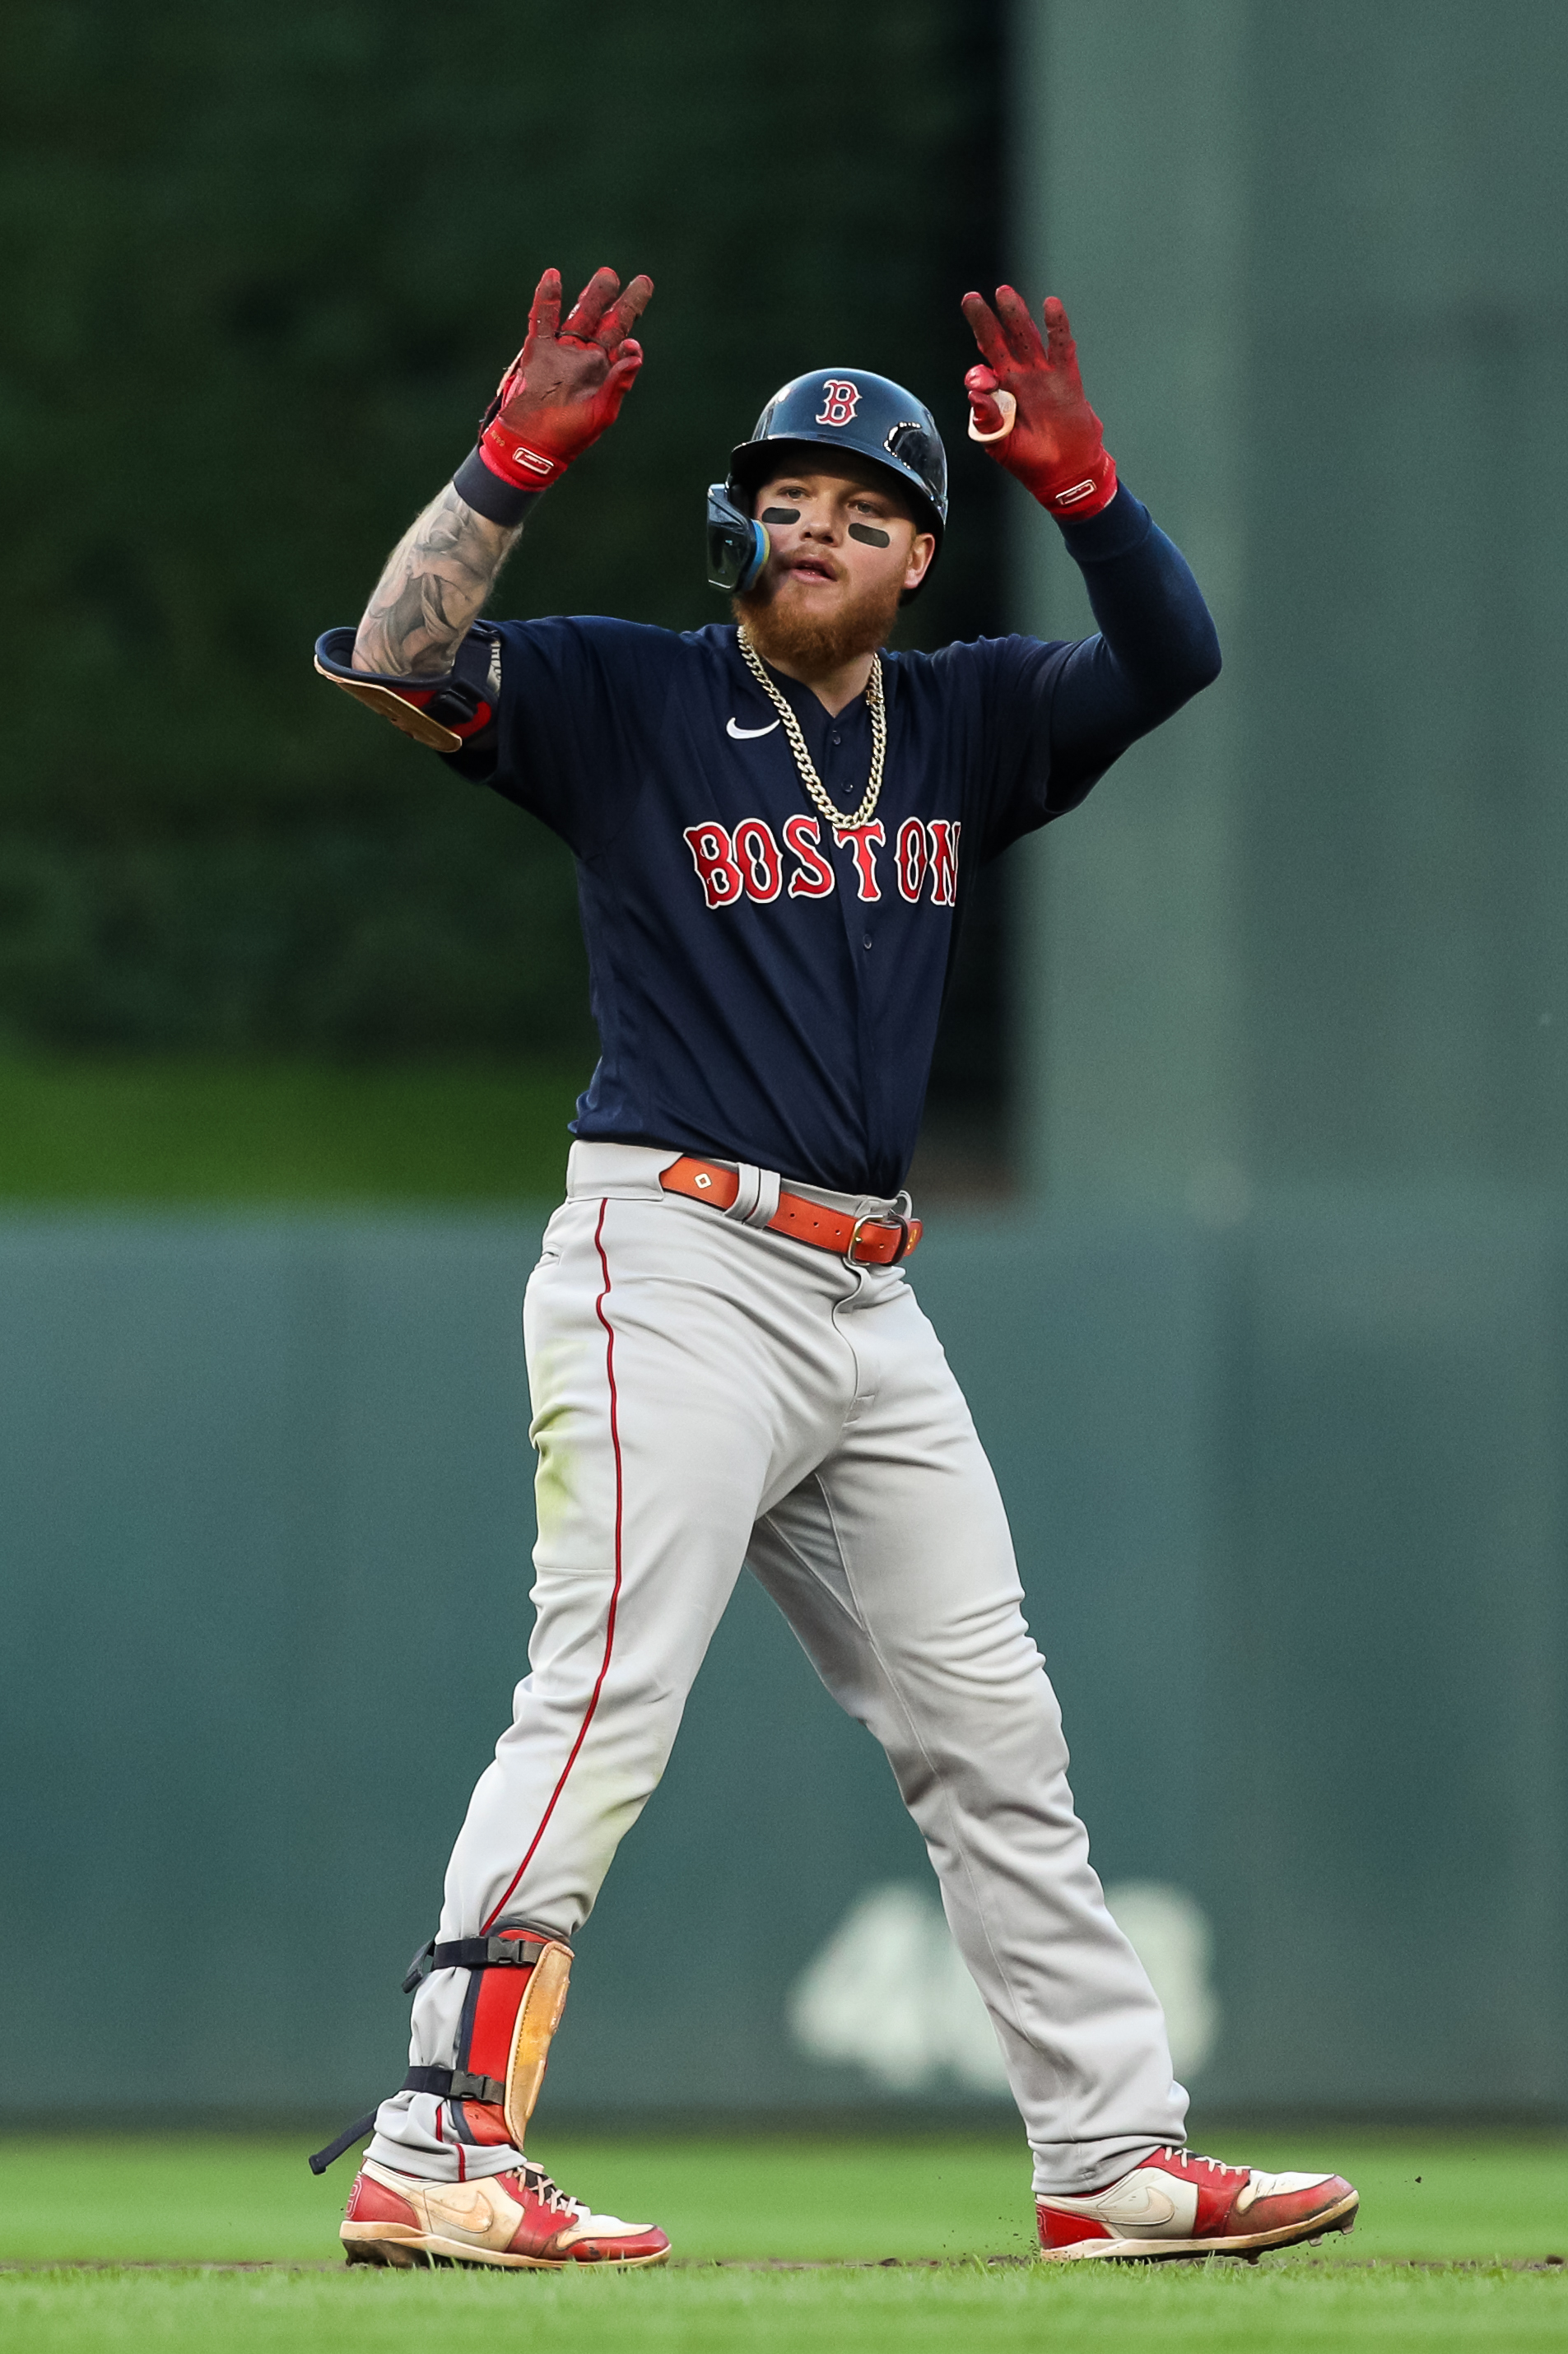 Red Sox take a step back, lose to Tigers to snap burgeoning win streak -  The Boston Globe